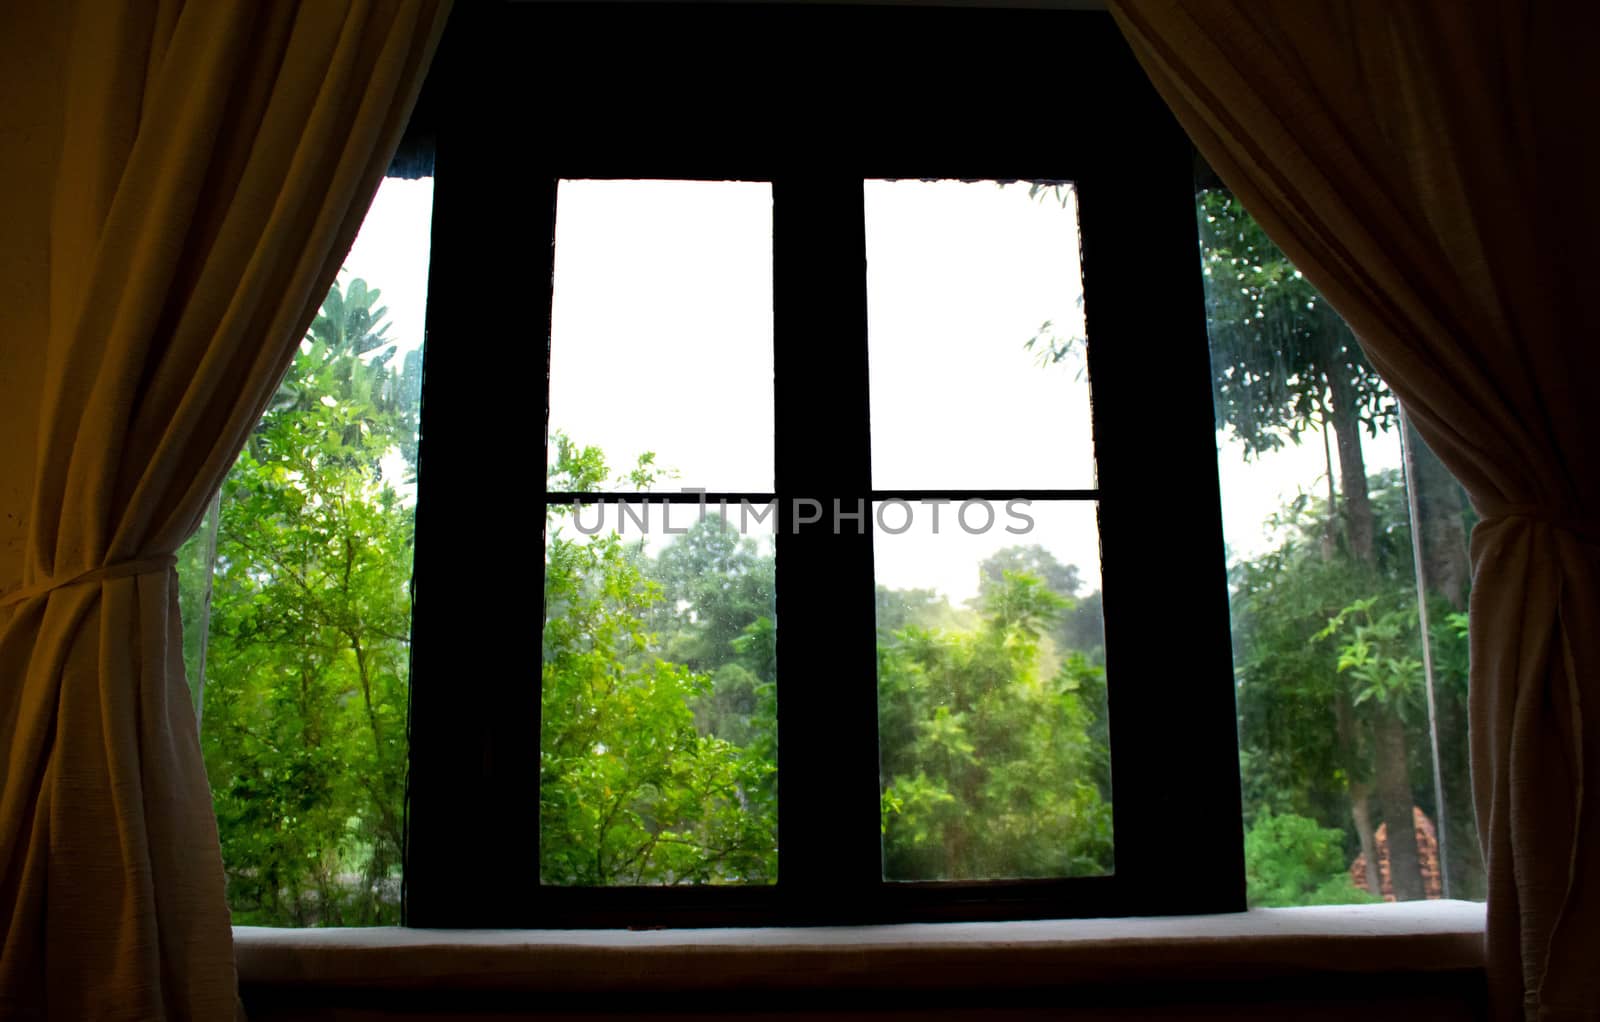 Vintage wooden window frames look out to see the trees in the garden look relaxed. by TEERASAK